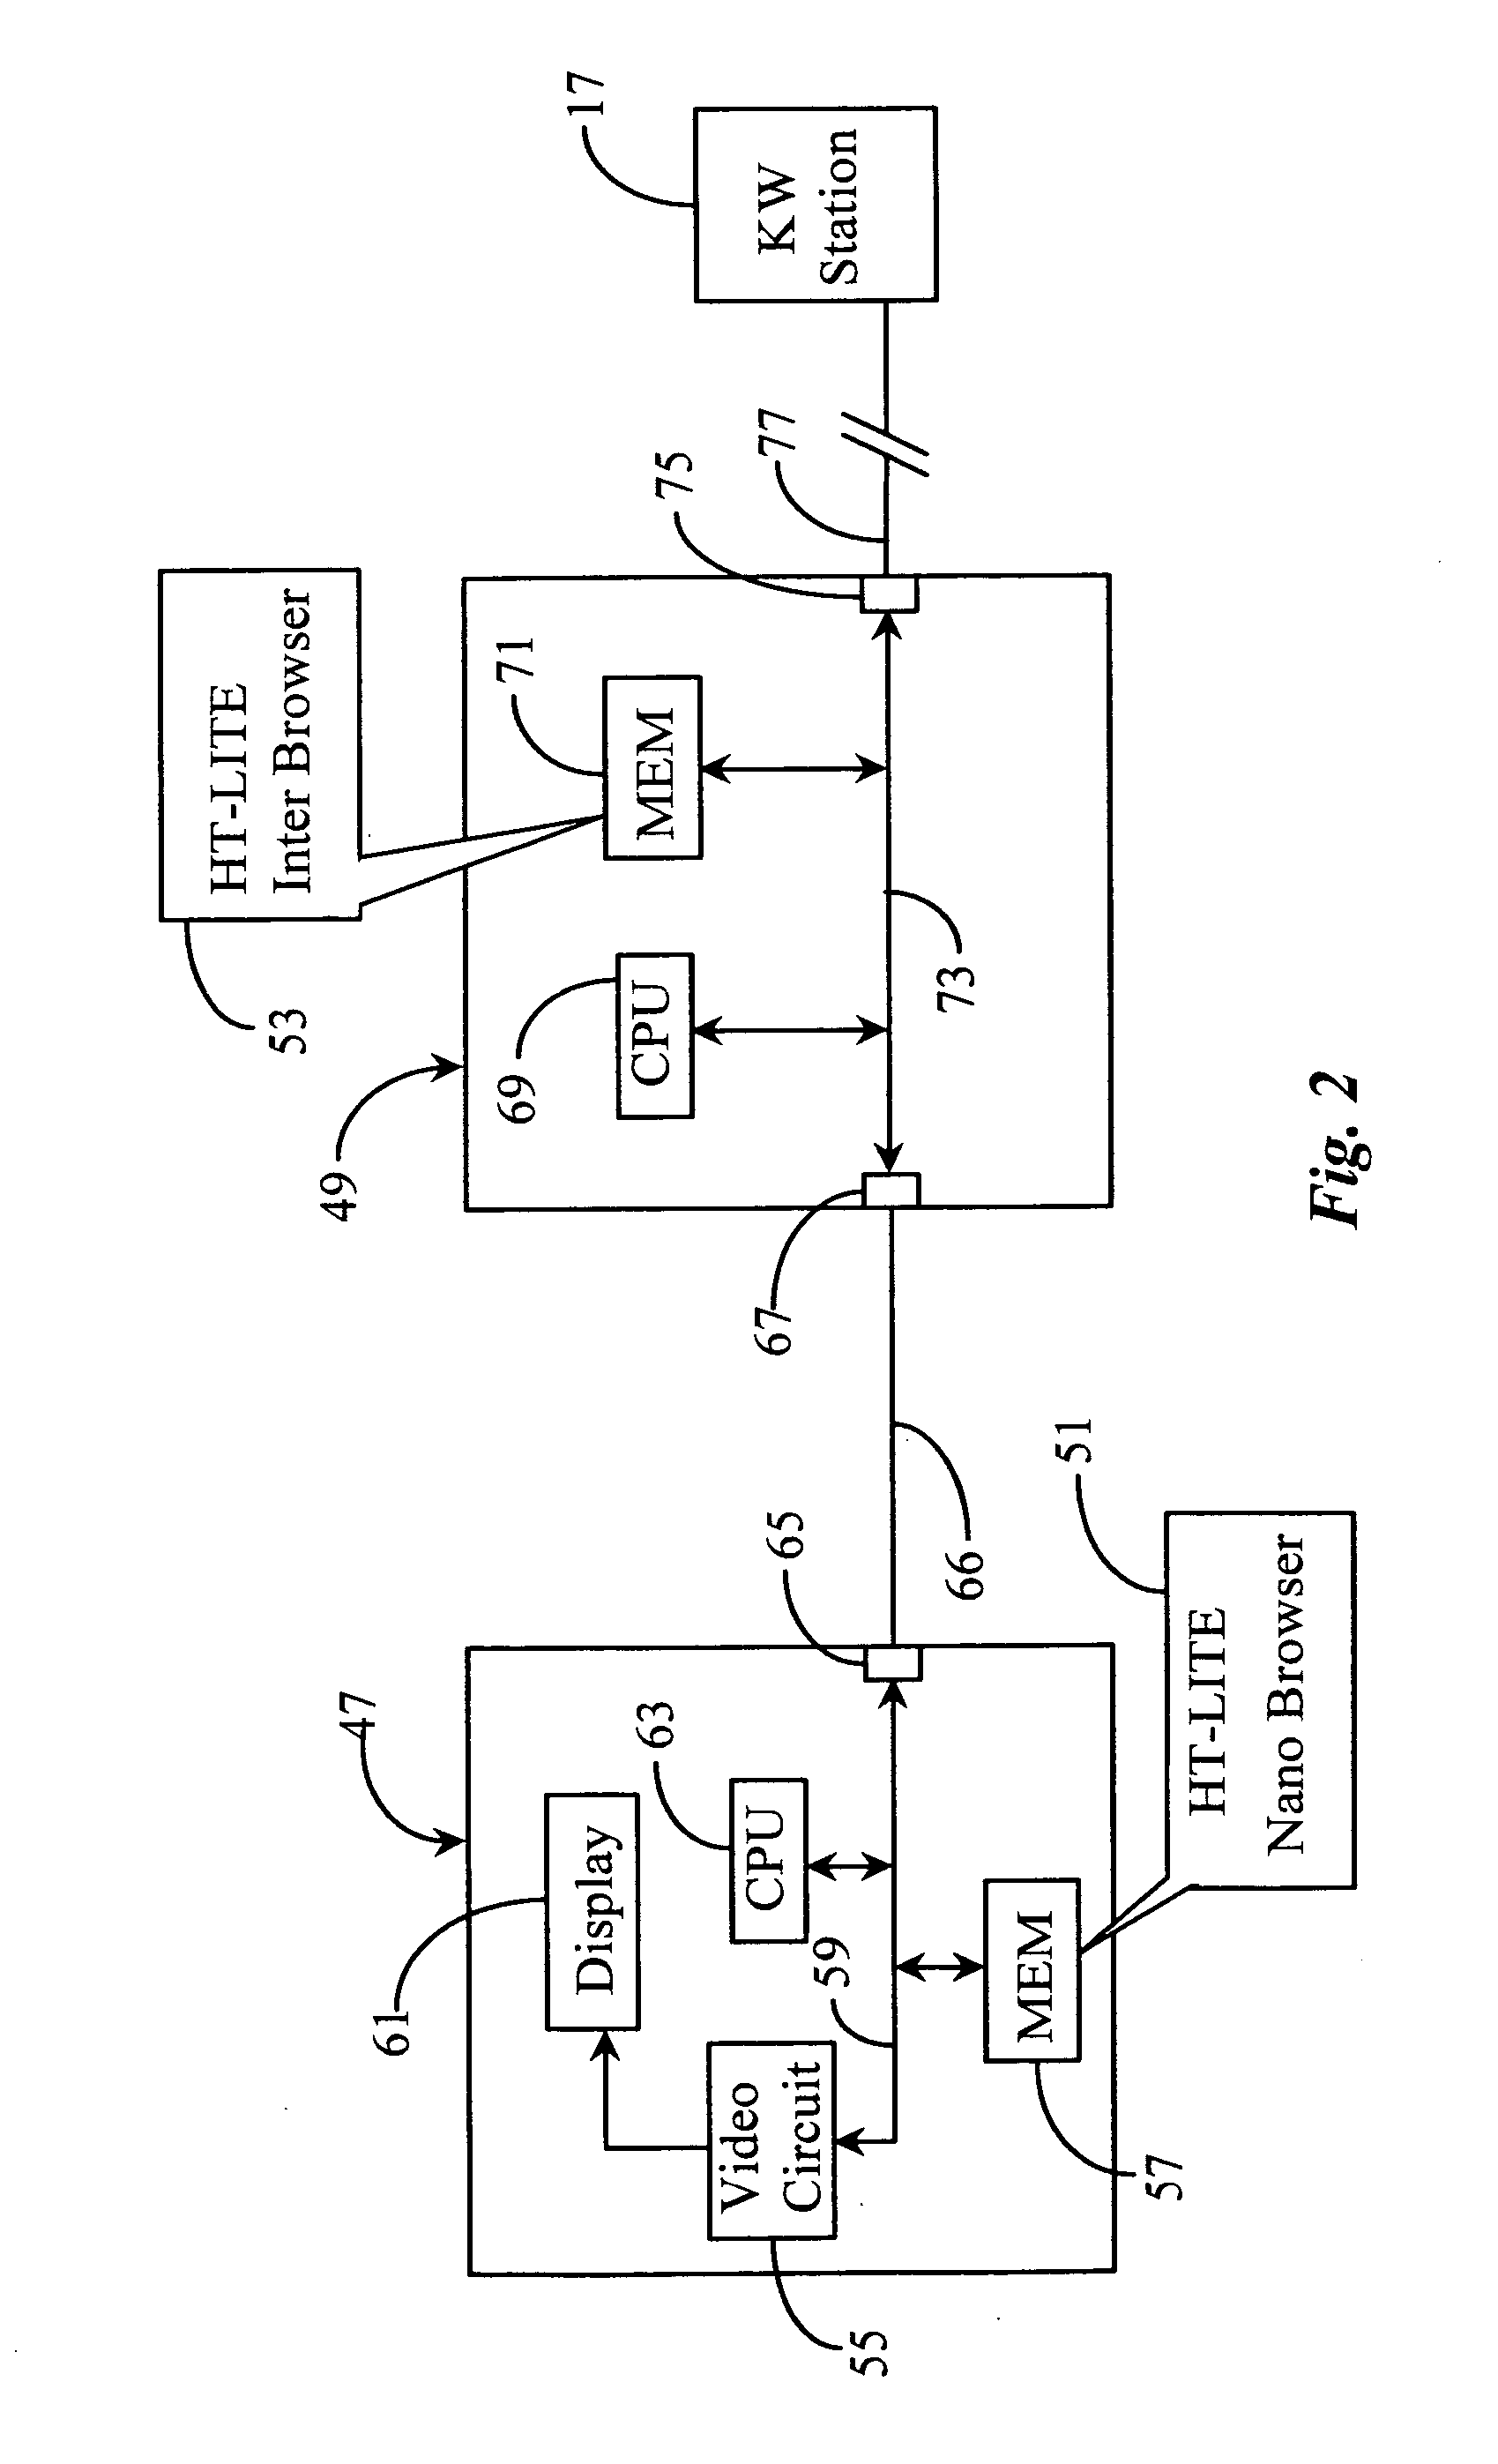 Method and apparatus enabling voice-based management of state and interaction of a remote knowledge worker in a contact center environment